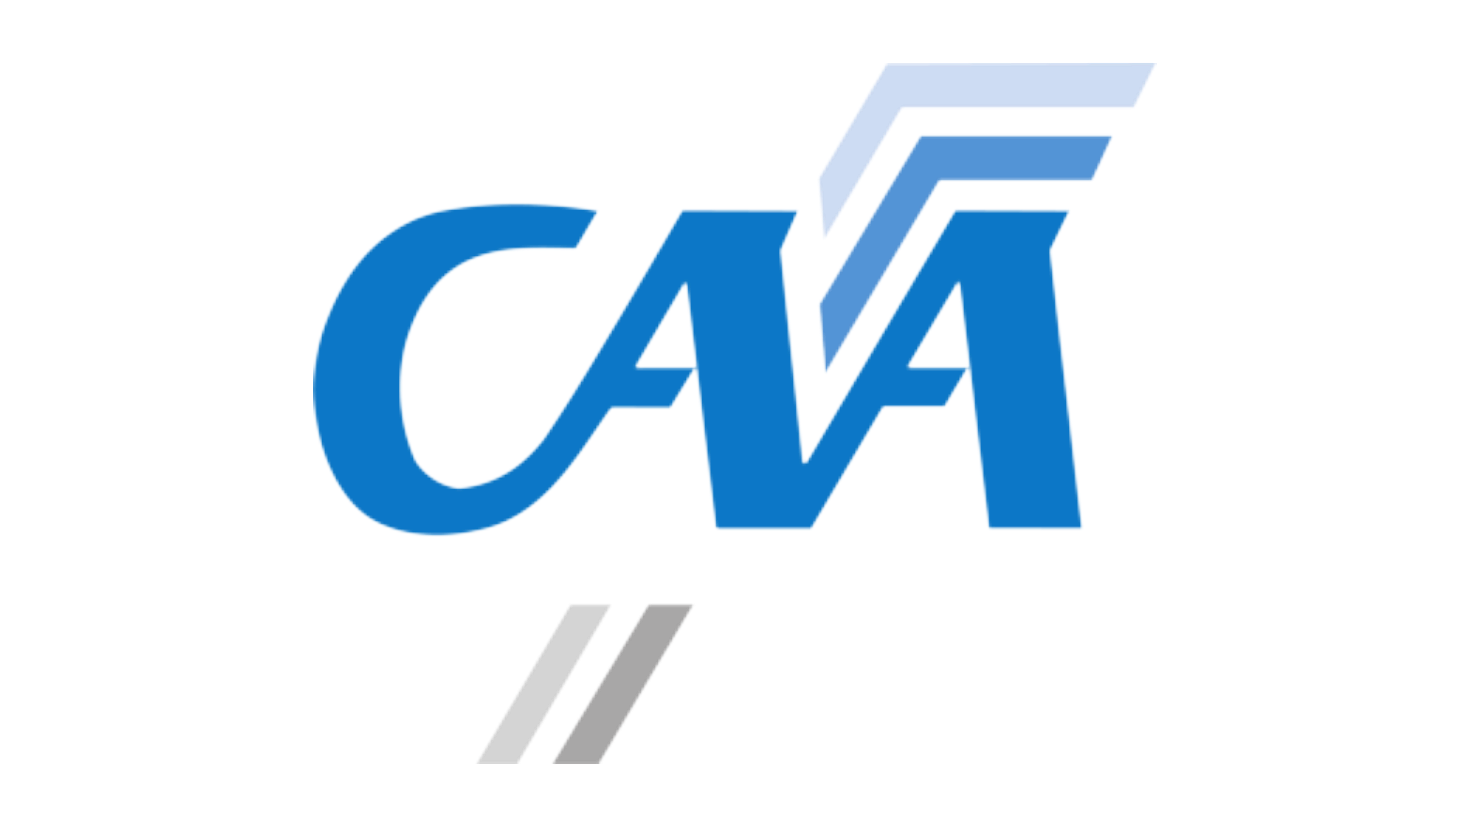 Civil Aviation Authority of New Zealand logo with blue letters.